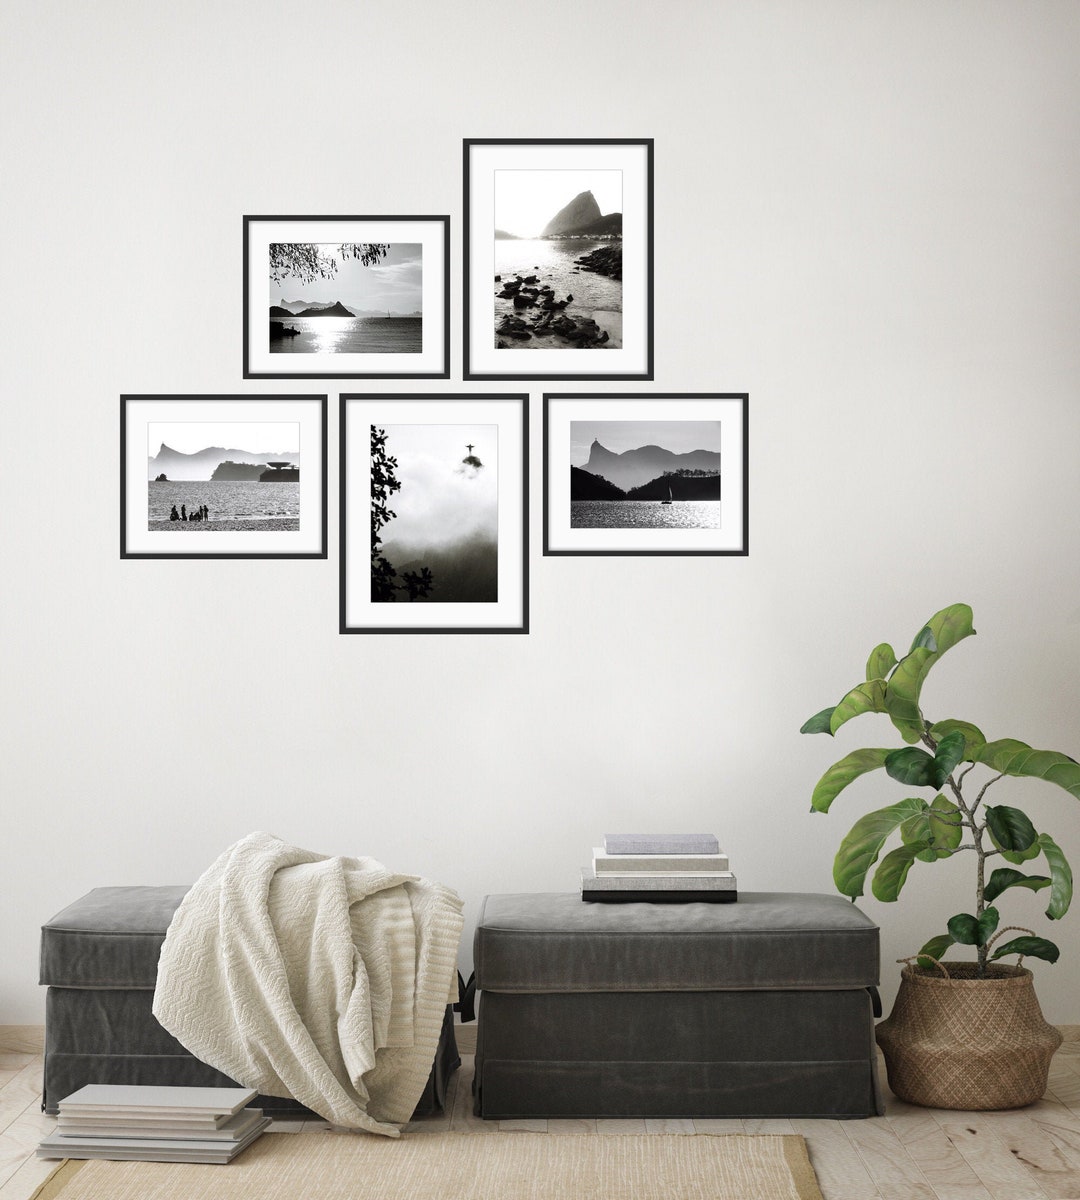 Gallery Set With 5 Prints Rio De Janeiro in Black and White - Etsy